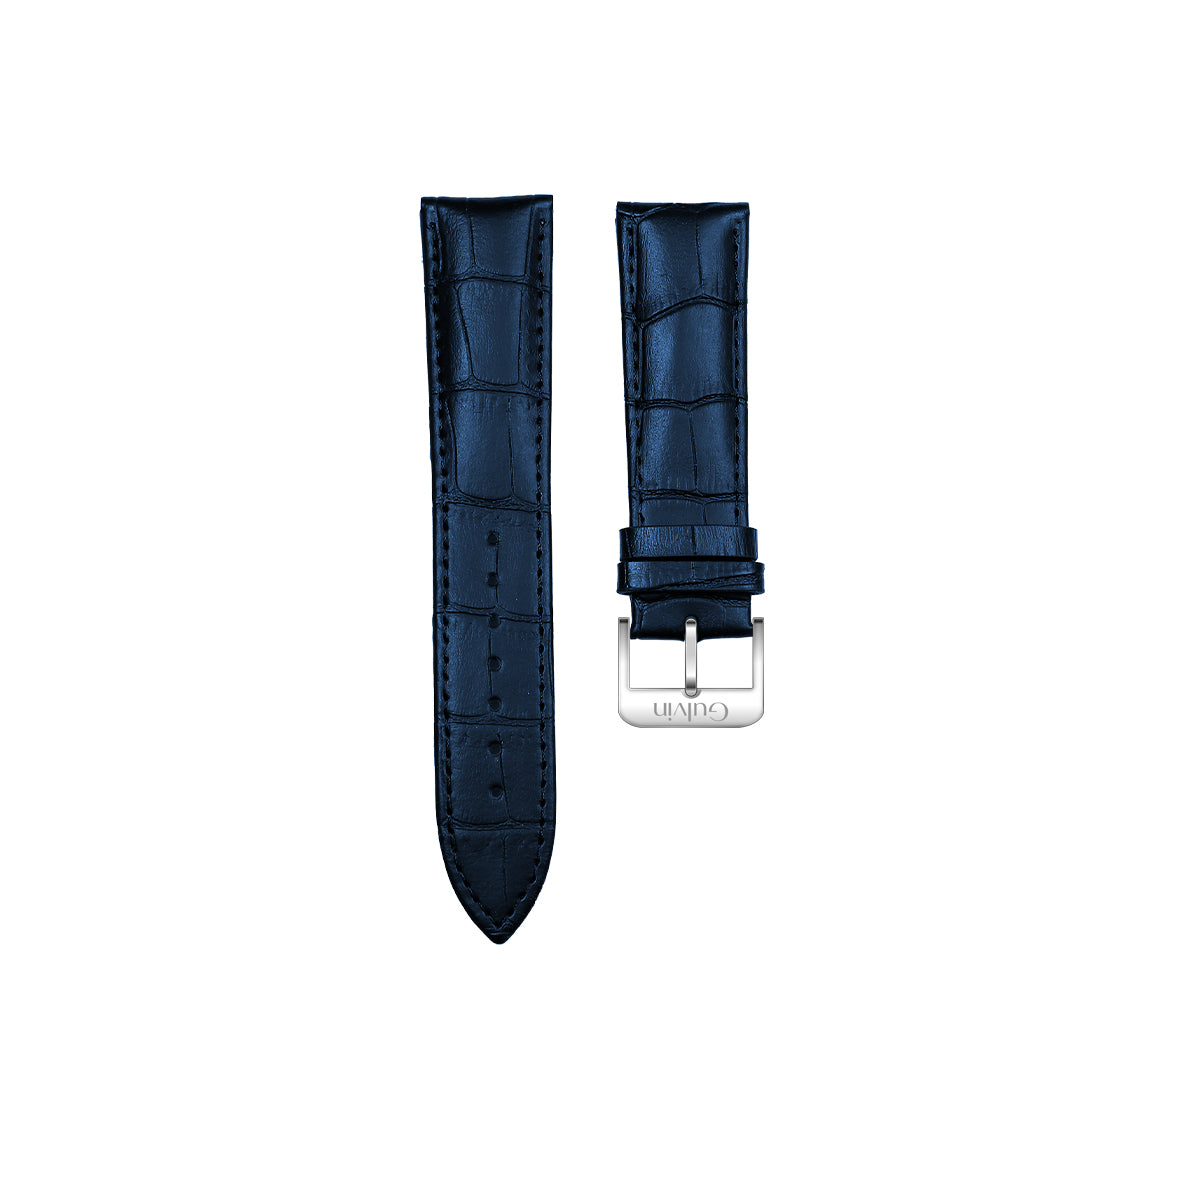 Gulvin blue leather strap - Luxury only